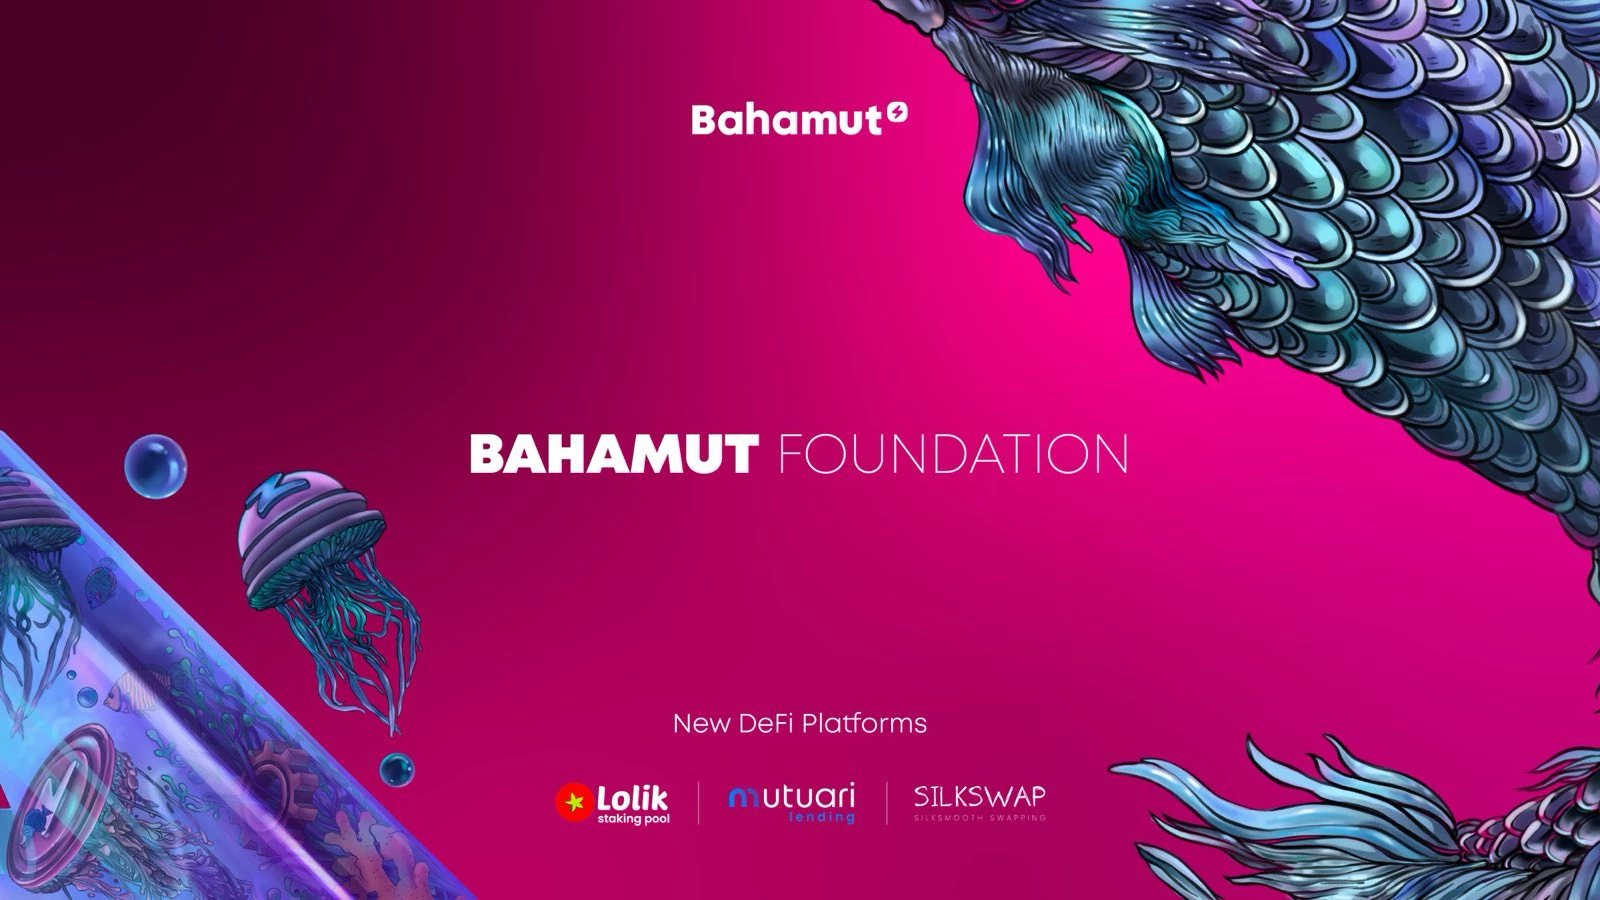 Bahamut Foundation announces the successful launch of 3 DeFi projects on Bahamut and the approved list of Bahamut Arena initial winners